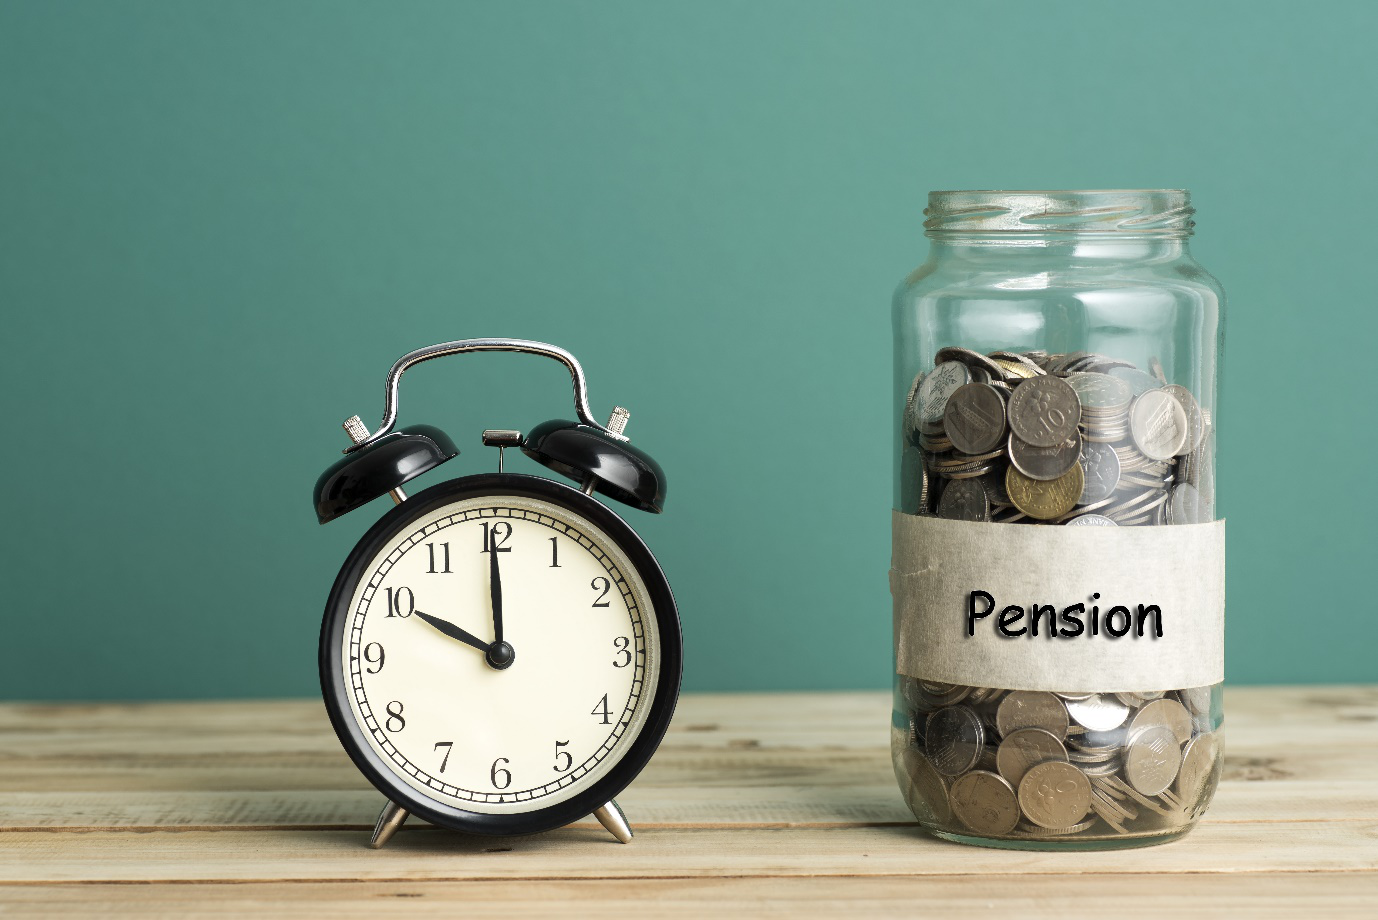 How to Check Old Age Pension?